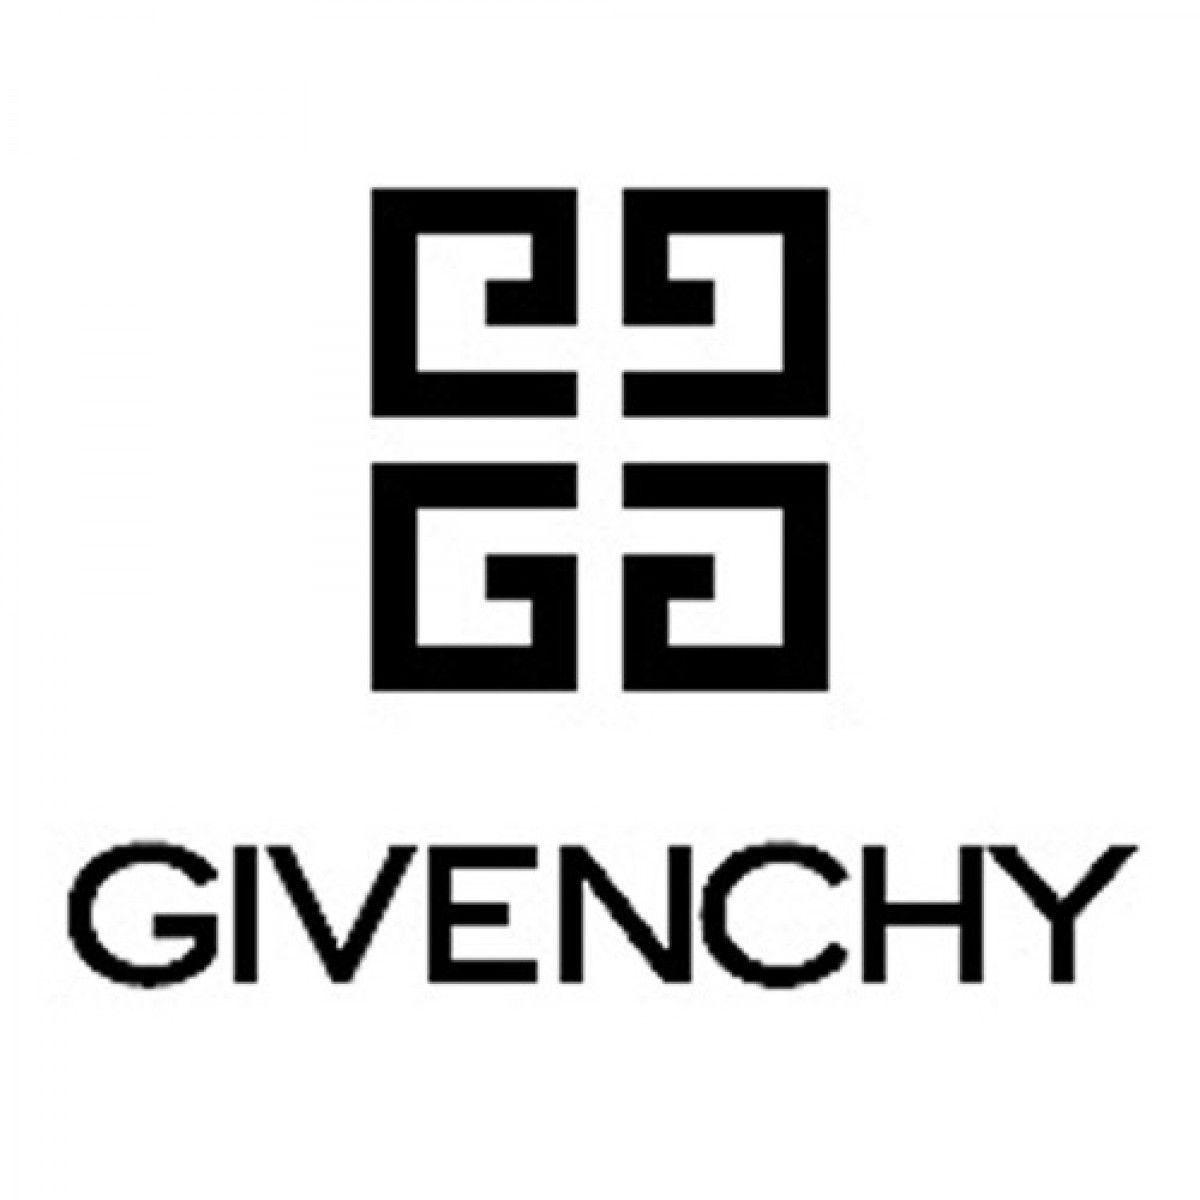 Expensive Fashion Logo - Gatsby would wear very expensive brands such as Givenchy. Brands